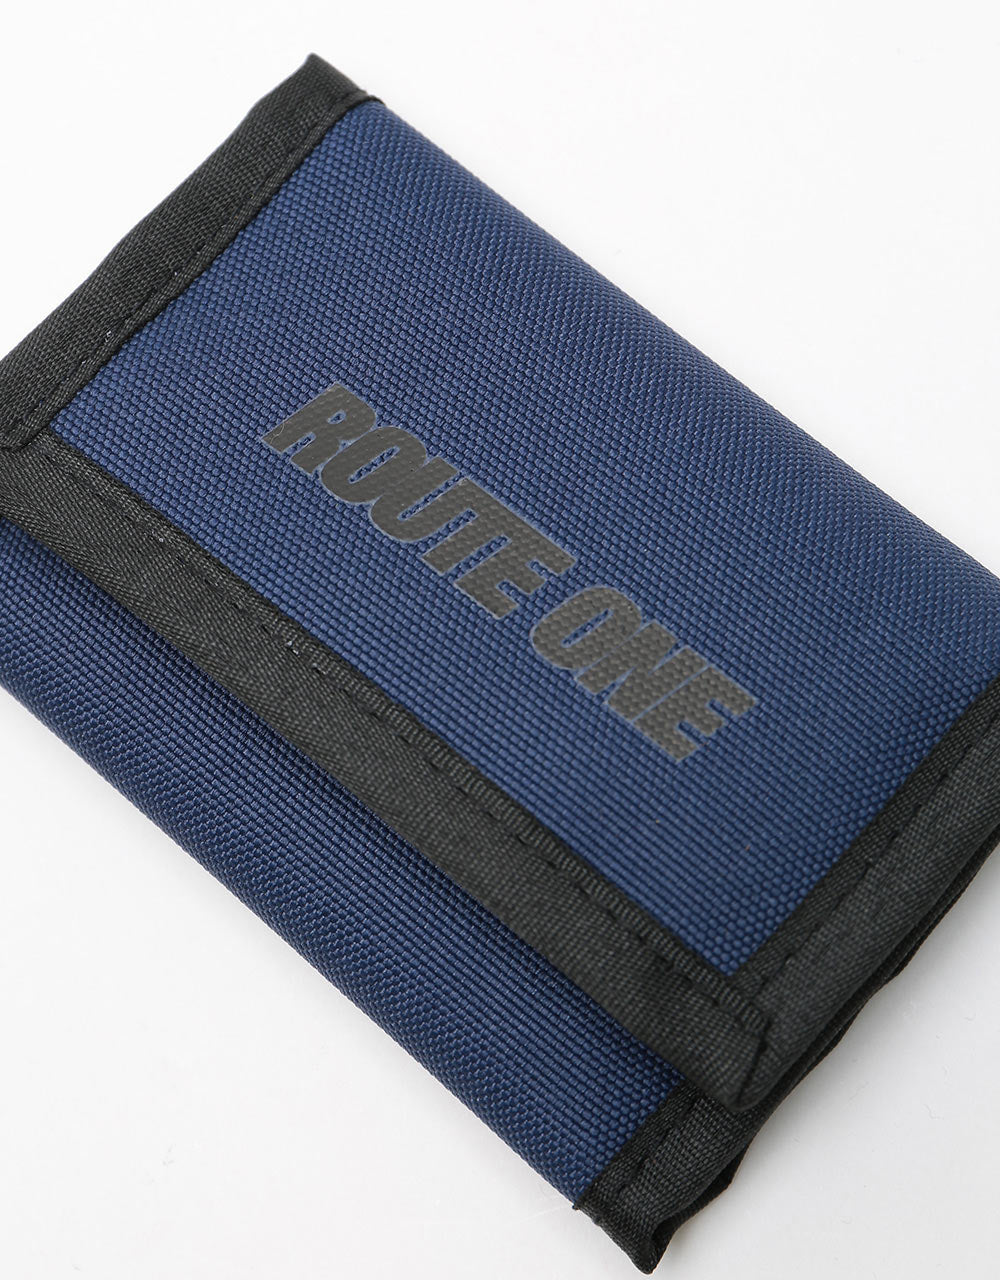 Route One Athletic Tri-Fold Wallet - Navy